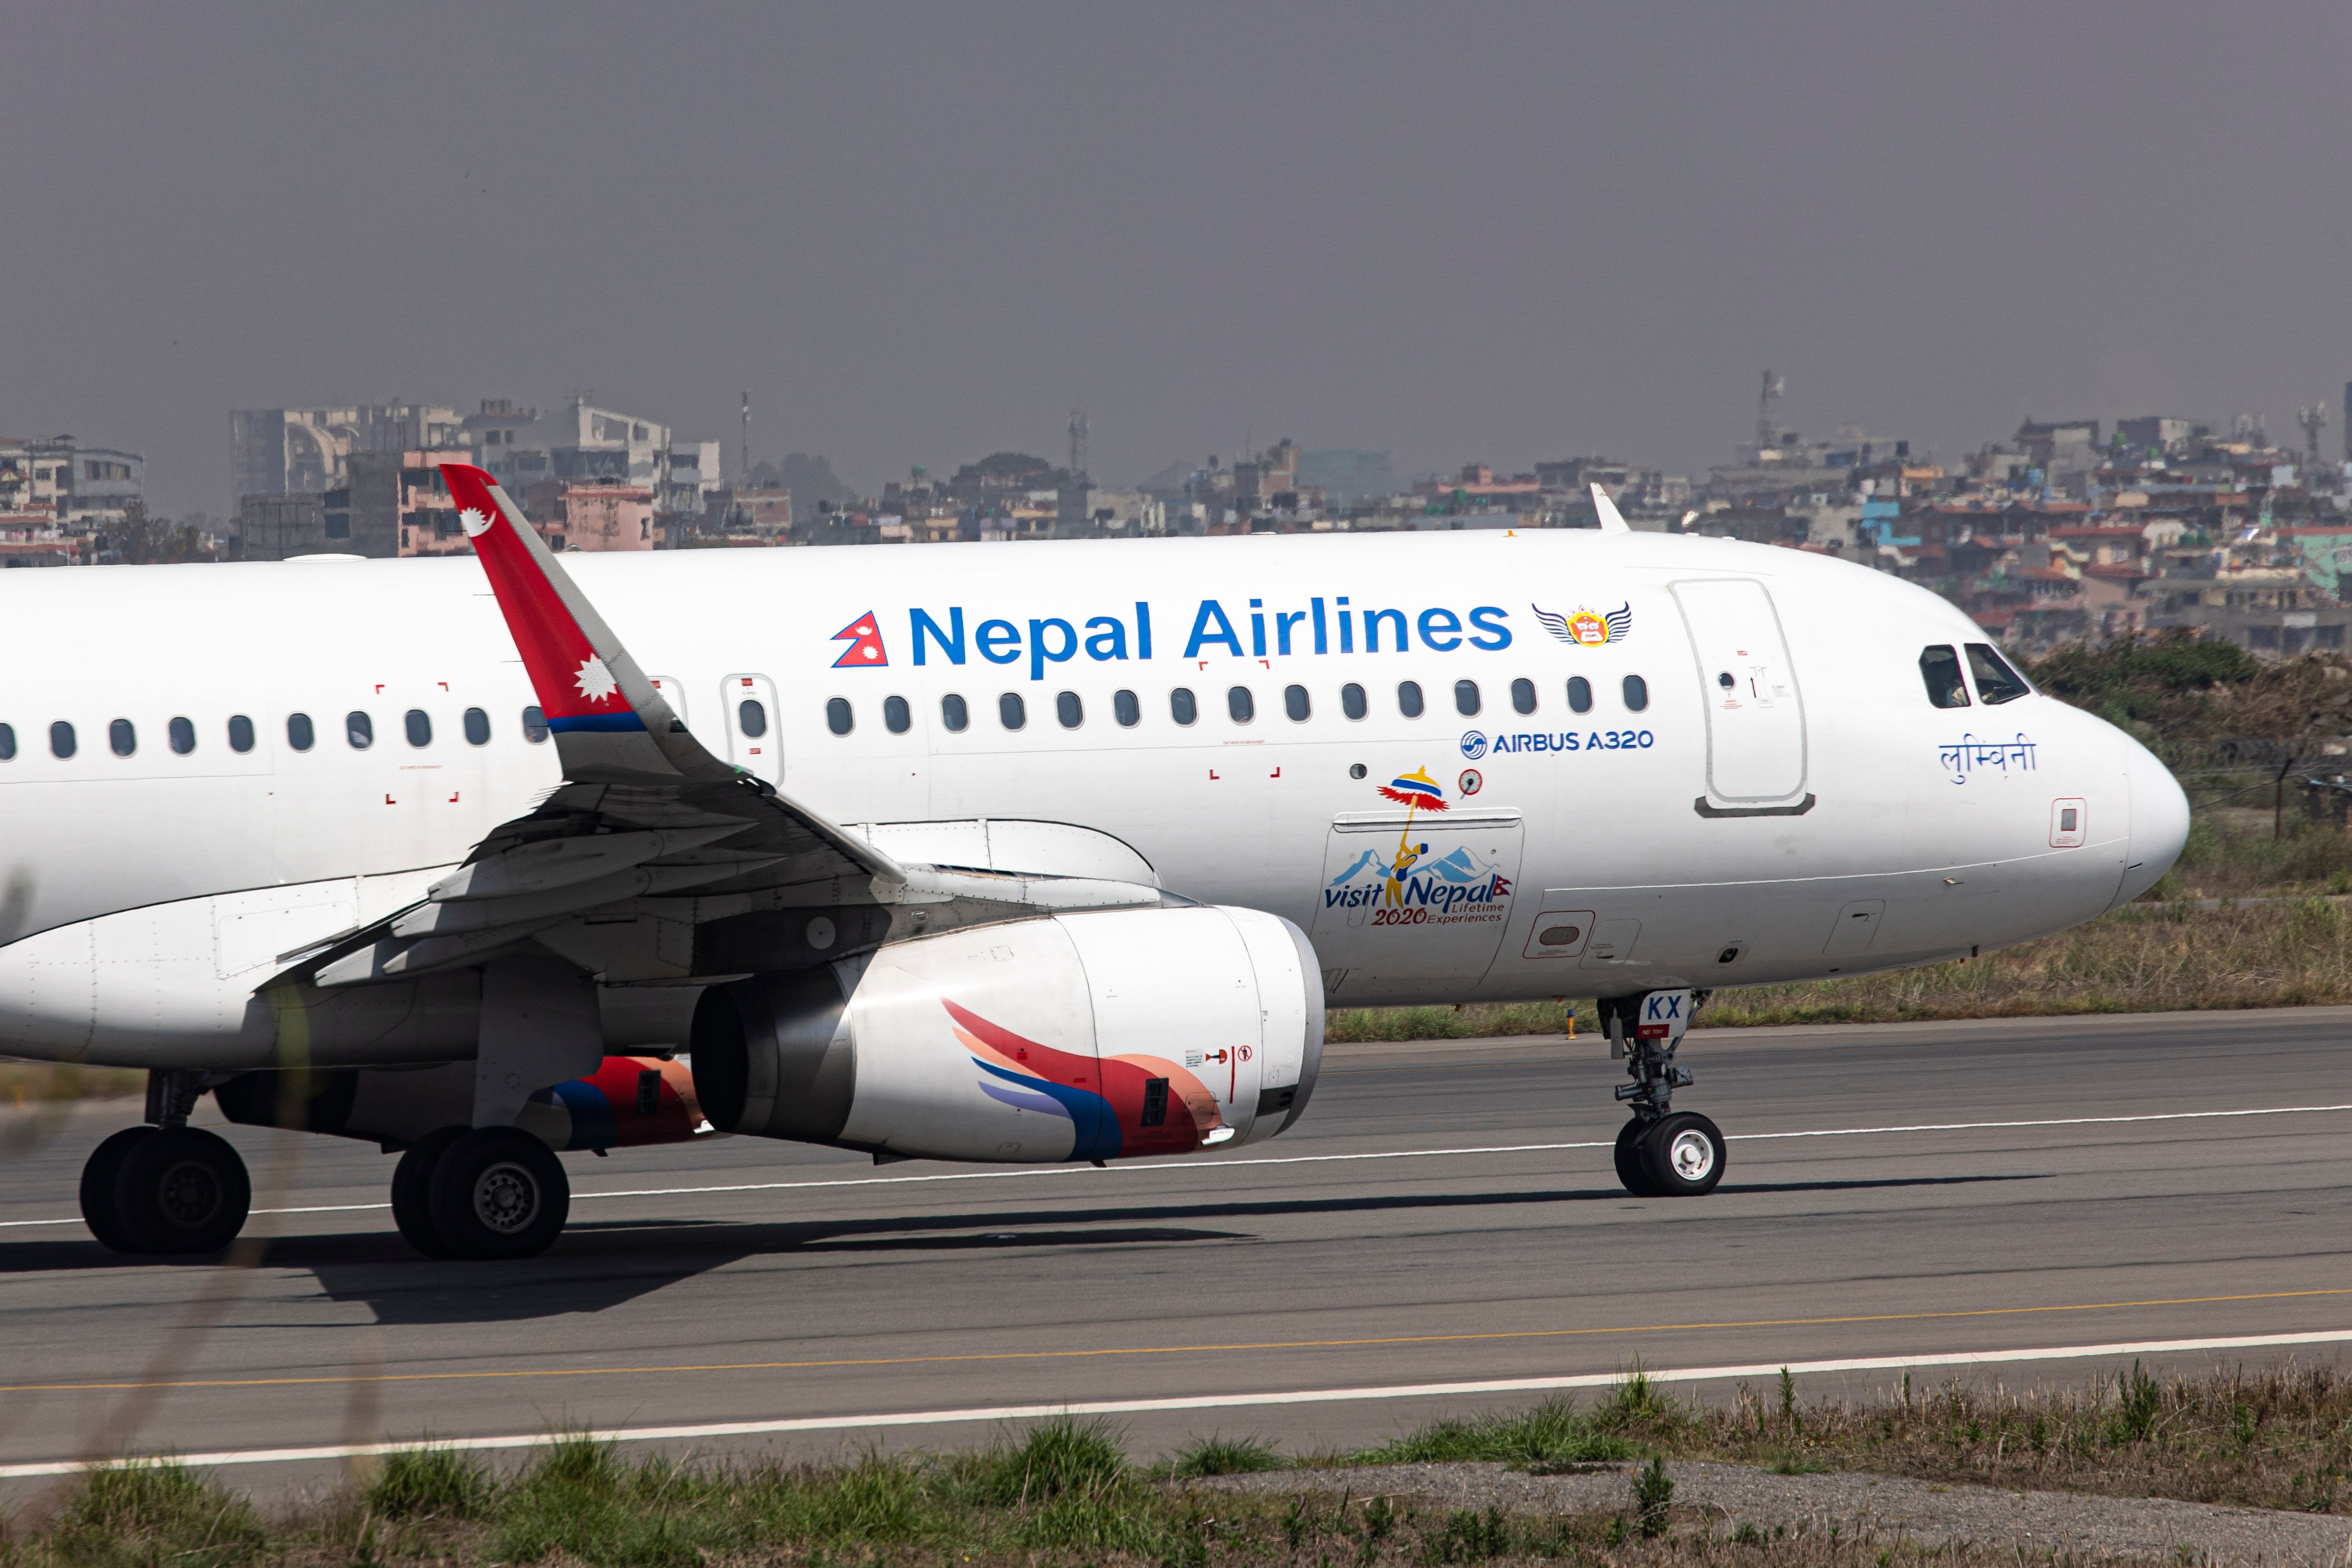 Nepal Airlines Airbus A320 aircraft as seen taxiing on the runway of Kathmandu Tribhuvan International Airport